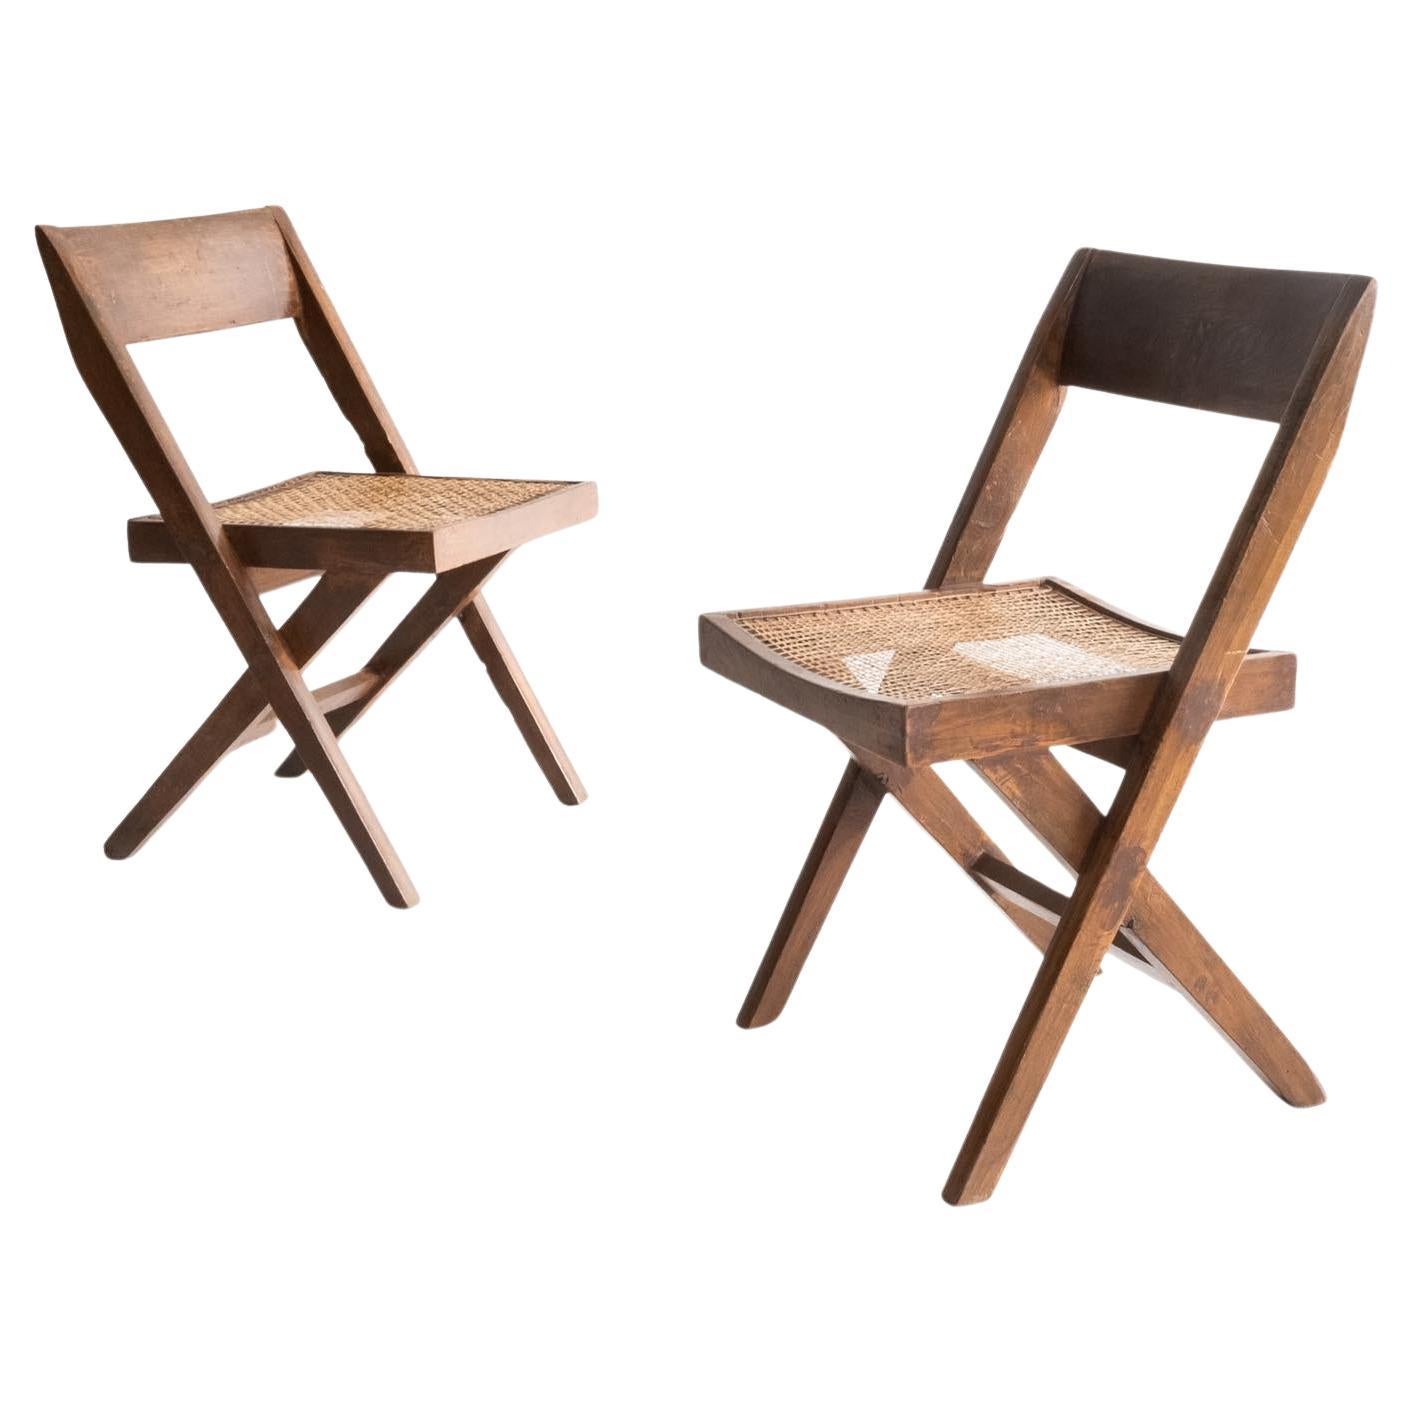 Set of 2, Pierre Jeanneret Library Chairs